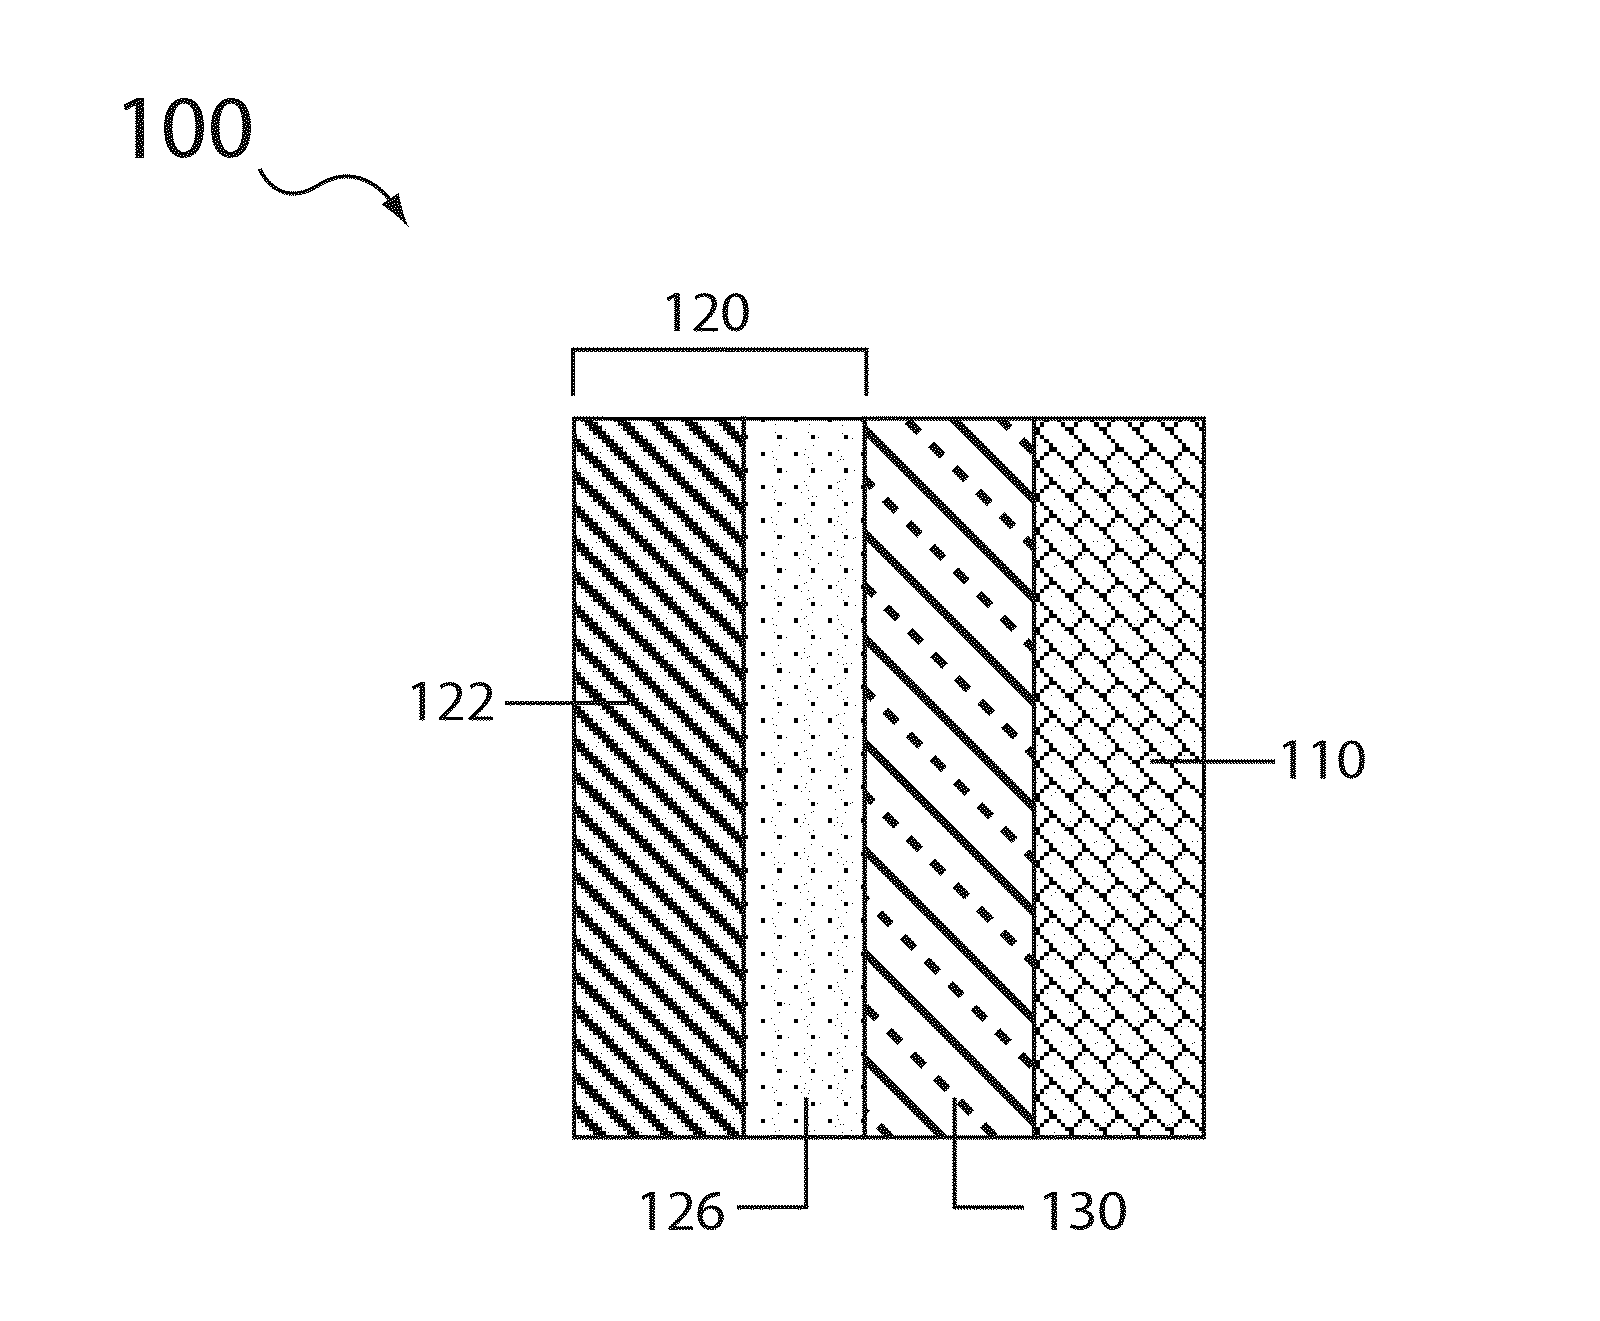 Electrolyte compositions for aqueous electrolyte lithium sulfur batteries